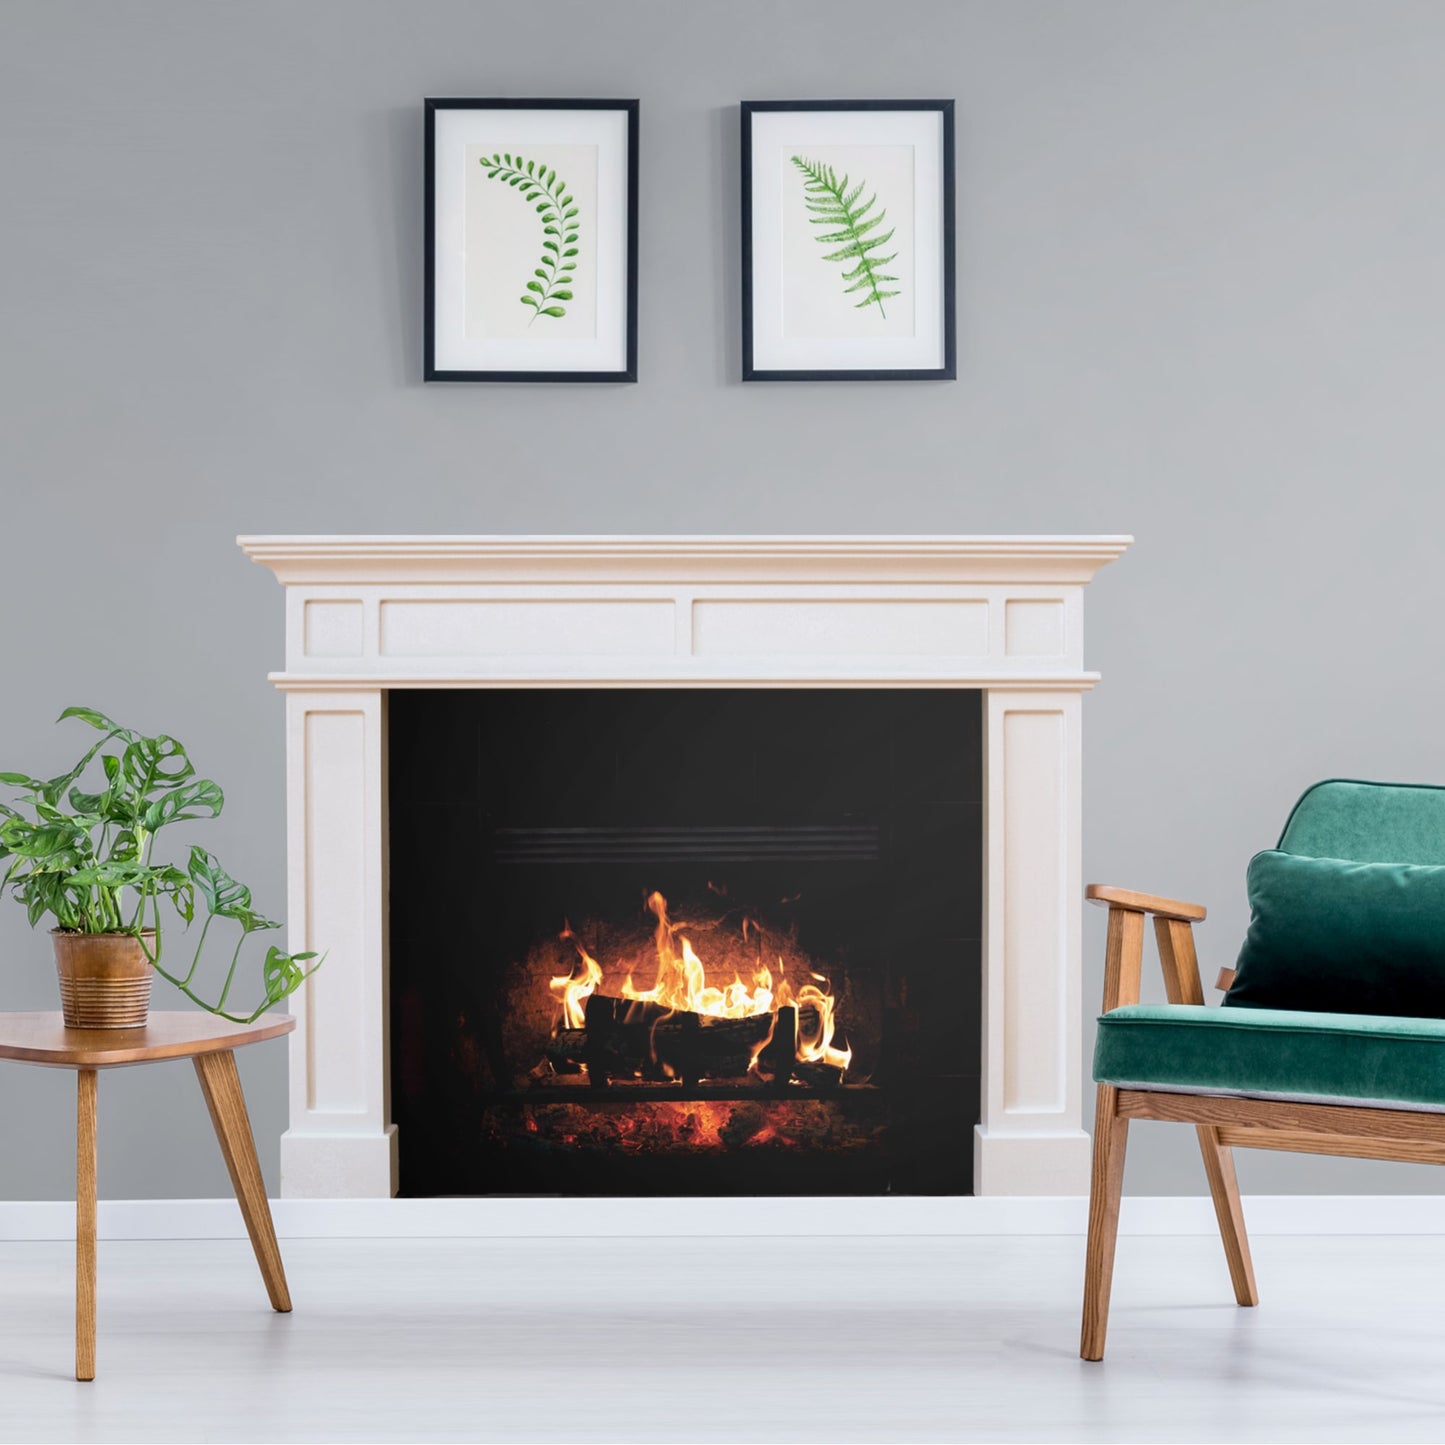 Fireplace         -   Removable     Adhesive Decal